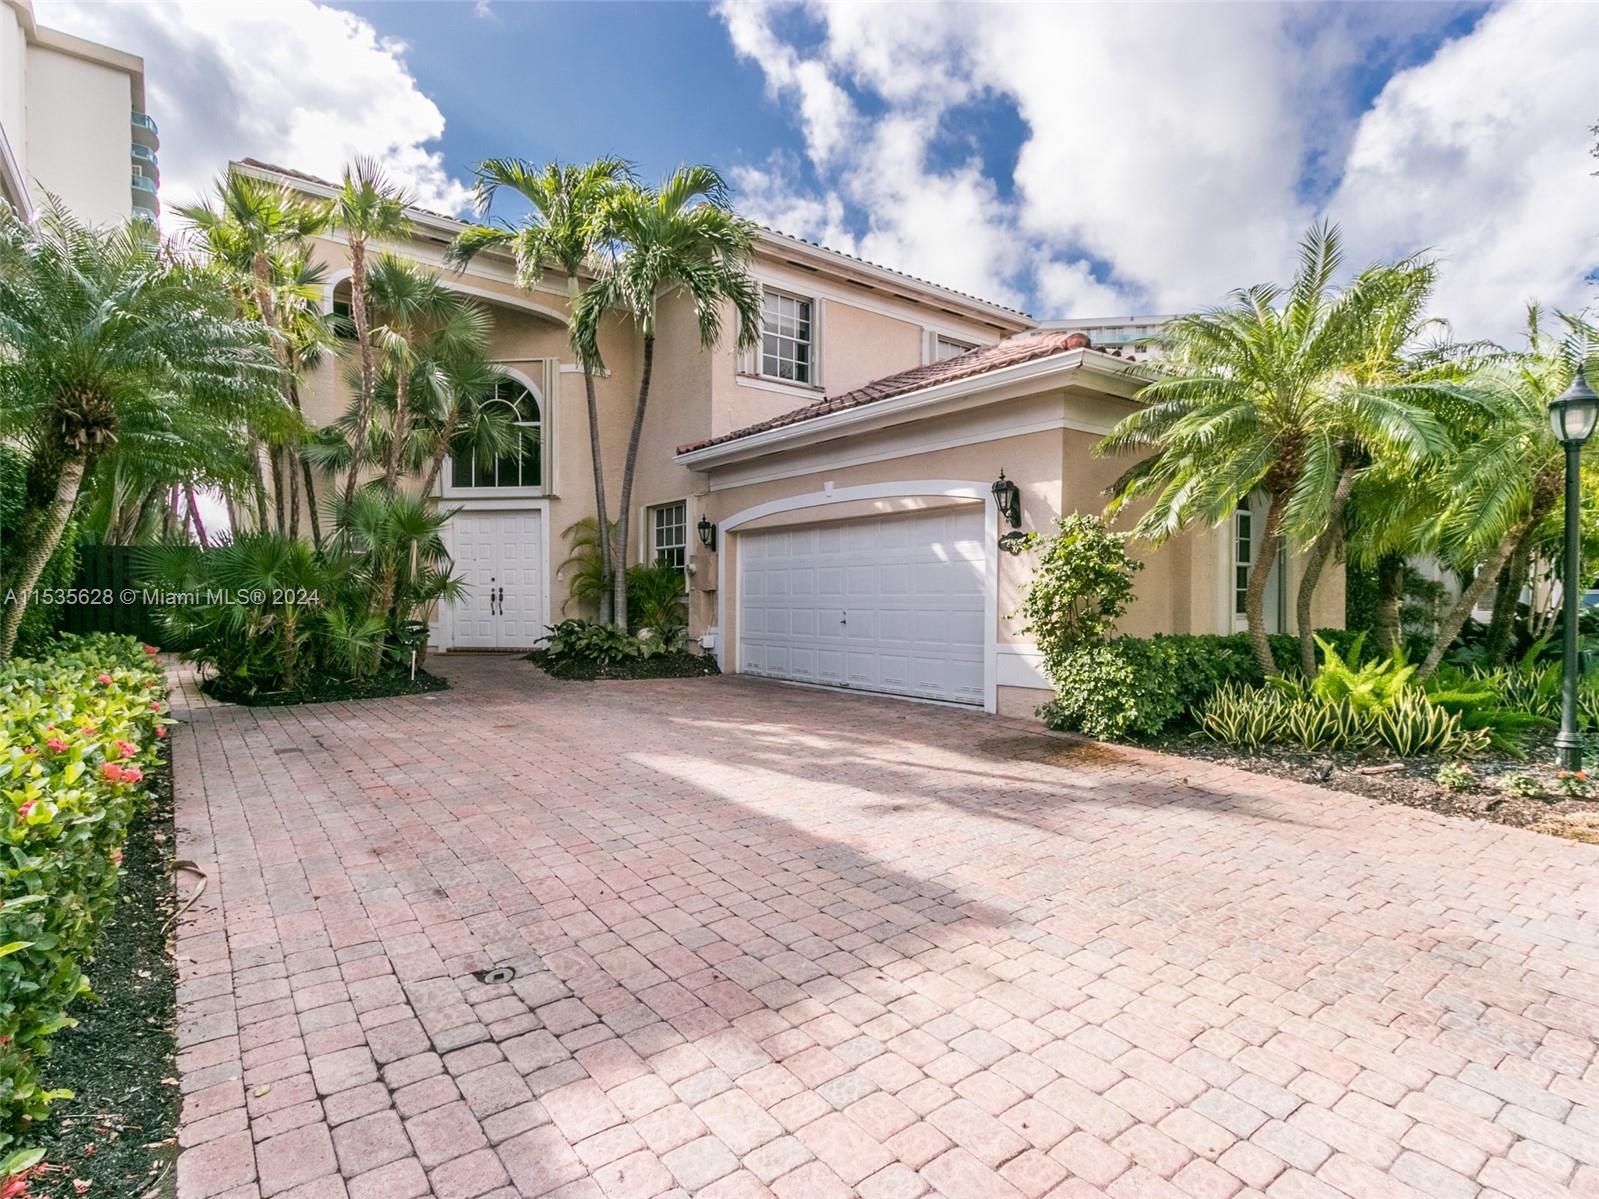 Unique Opportunity Available in Golden Gate Estates & Marina. This Private Single Family Pool Home is Situated between Golden Beach and Sunny Isles in a Guard Gated Community with 24/7 Manned Security. Our Exclusive Community is Just Steps Away & Across the Street From the Beautiful Beaches of South Florida. This Gem Features 5br/4.5ba with One Bedroom on the Ground Floor, High Ceilings, Chef's Kitchen, Spacious Master Suite, Plenty of Closets, 2 Car Garage, Fenced Yard and Pool Area, Abundant Space for Relaxation and Entertainment. Additional Community Amenities include a Children's Playground, Marina, Guard Gate/Security, and Tennis Courts. Live Next to the Beach,  Shopping, Houses of Worship, Restaurants & Entertainment Nearby, Easy Access to Major Roadways Via William Lehman Causeway.